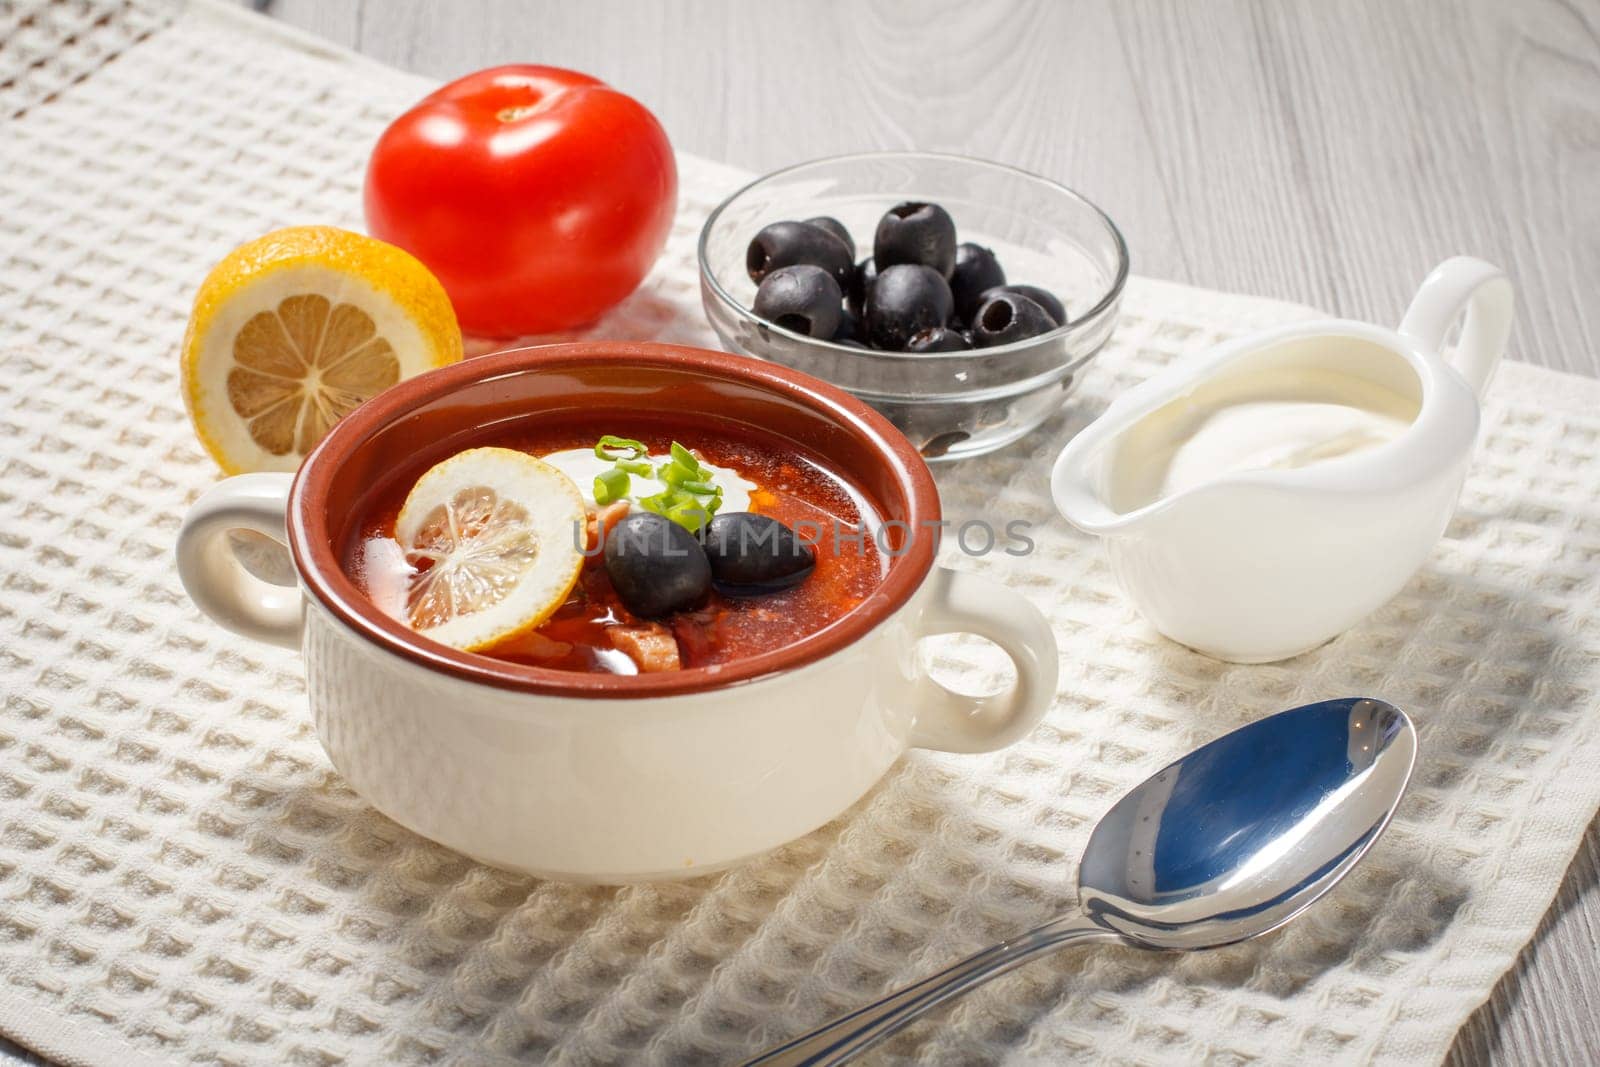 Soup saltwort with meat, potatoes, tomatoes, lemon, black olives and sour cream in ceramic soup bowl. by mvg6894